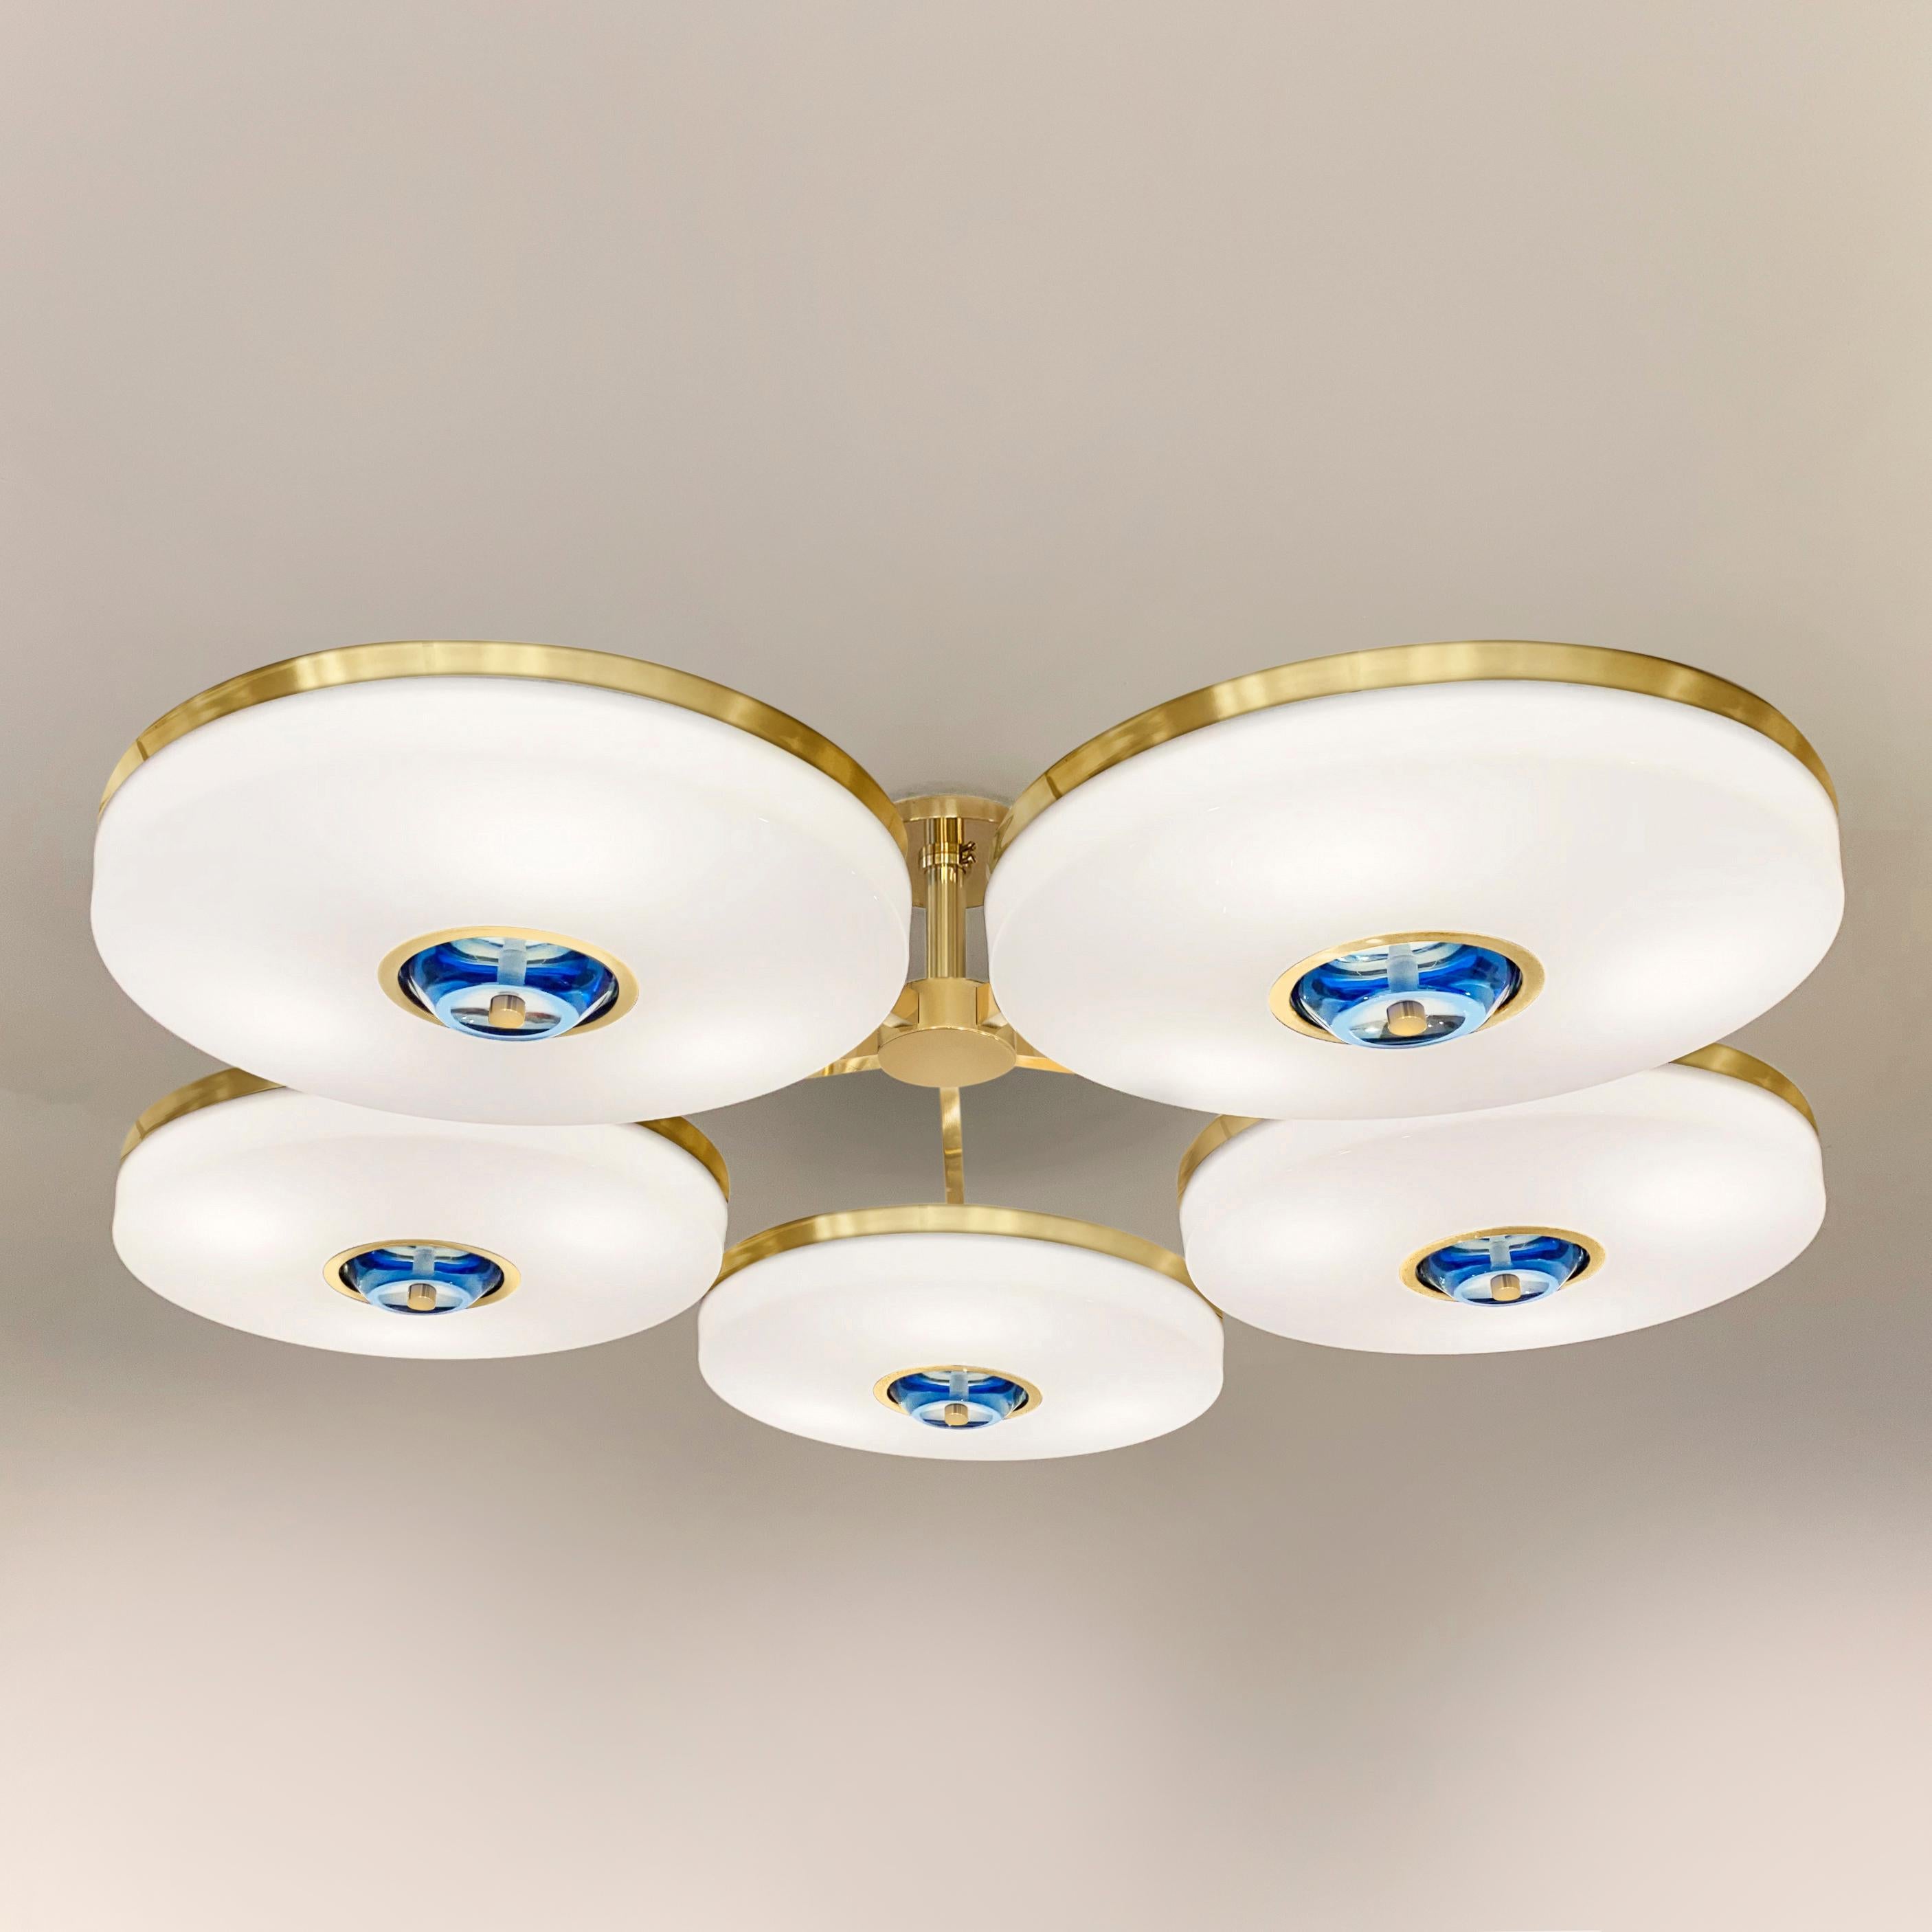 The Iris N.5 ceiling light is designed around five expansive acrylic shades with hand carved glass centers. This versatile fixture can be installed on a stem or as a flush mount. The first images show the fixture in our polished brass